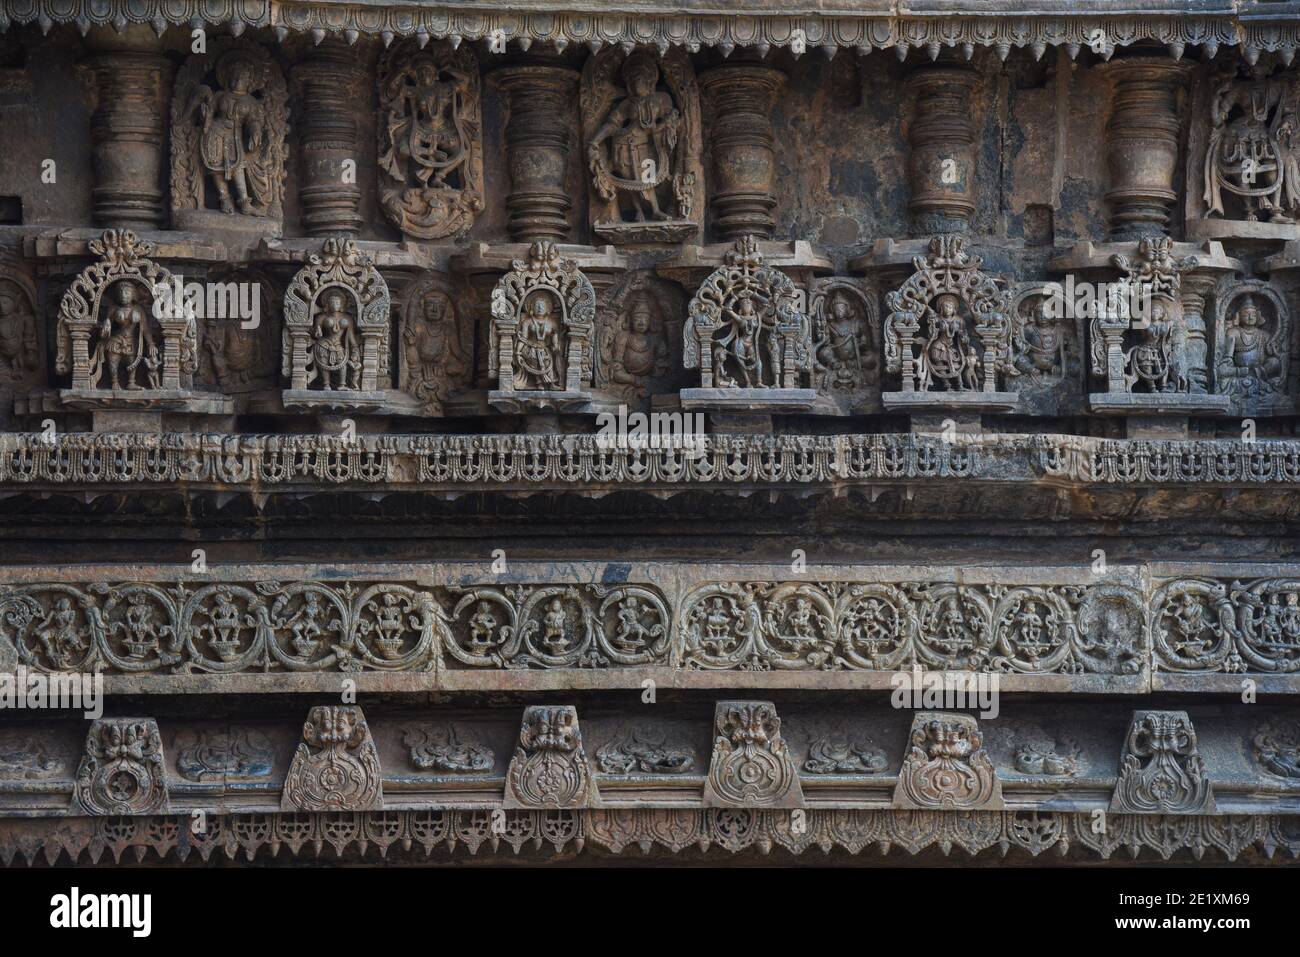 rock art on the walls of Indian temple. carvings on the walls of Belur and Halebidu temples in Karnataka, India. Stock Photo